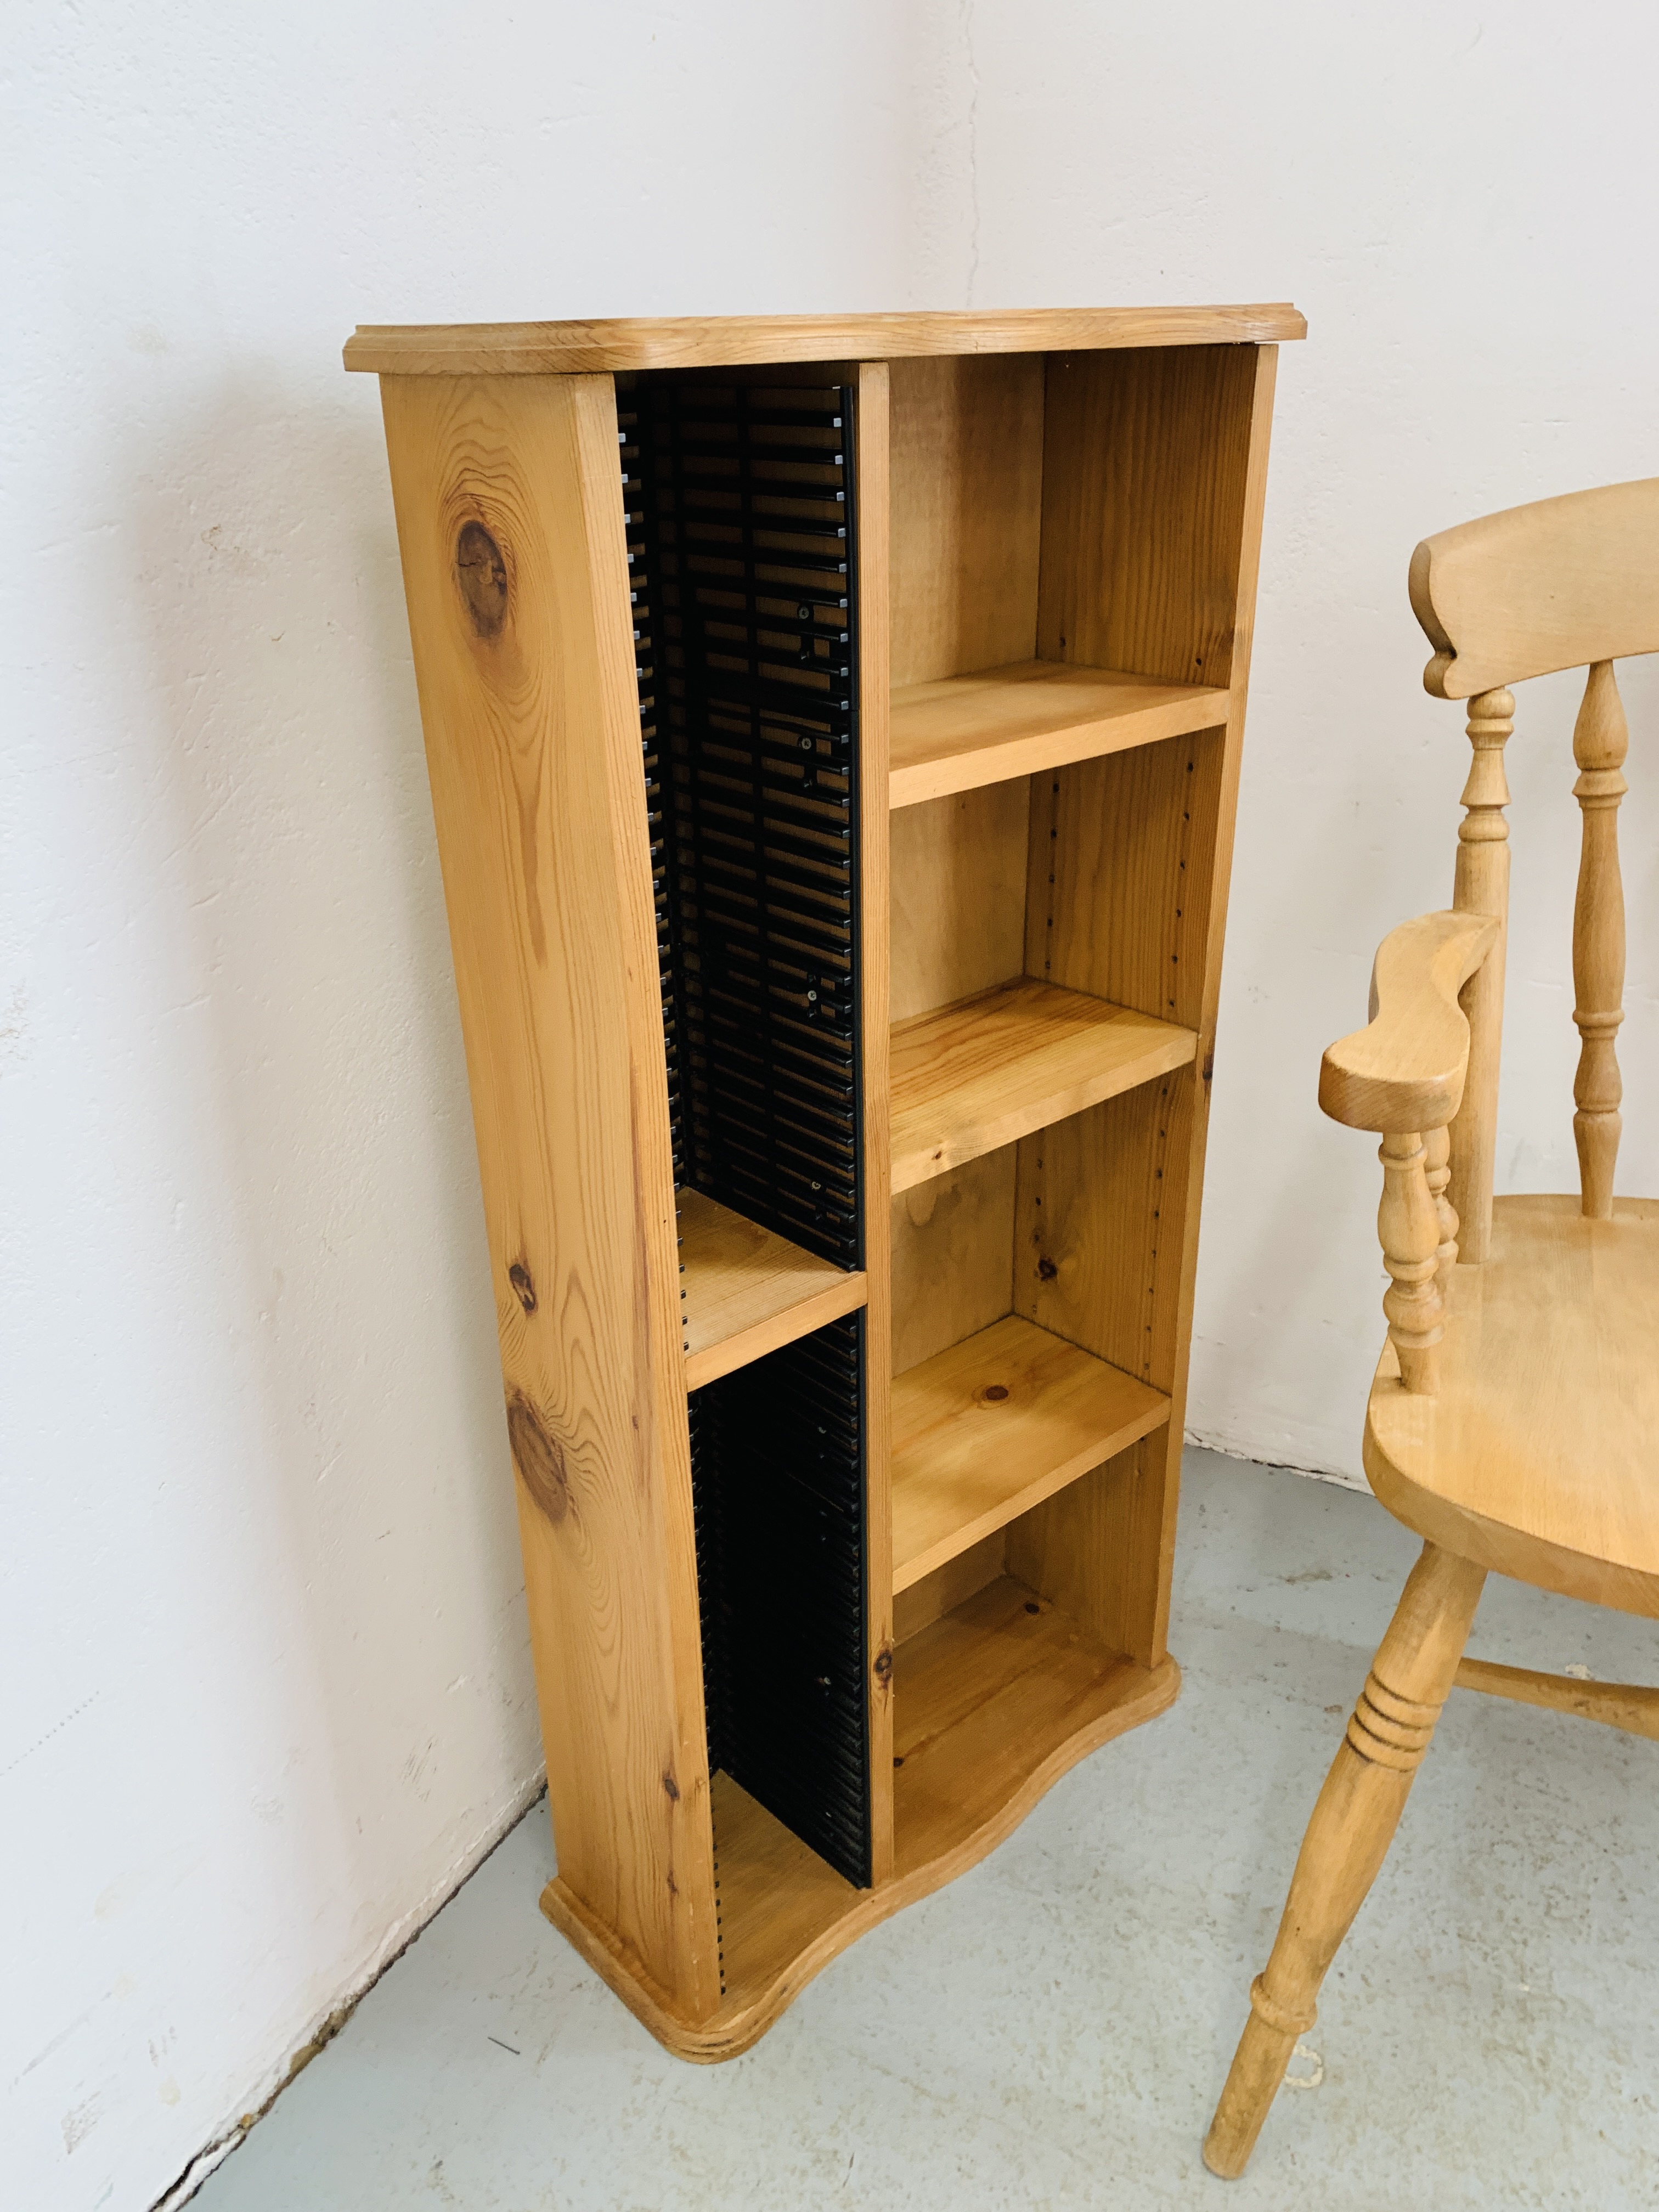 A BEECHWOOD TRADITIONAL ELBOW CHAIR AND WAXED PINE MEDIA STORAGE SHELF - Image 3 of 4